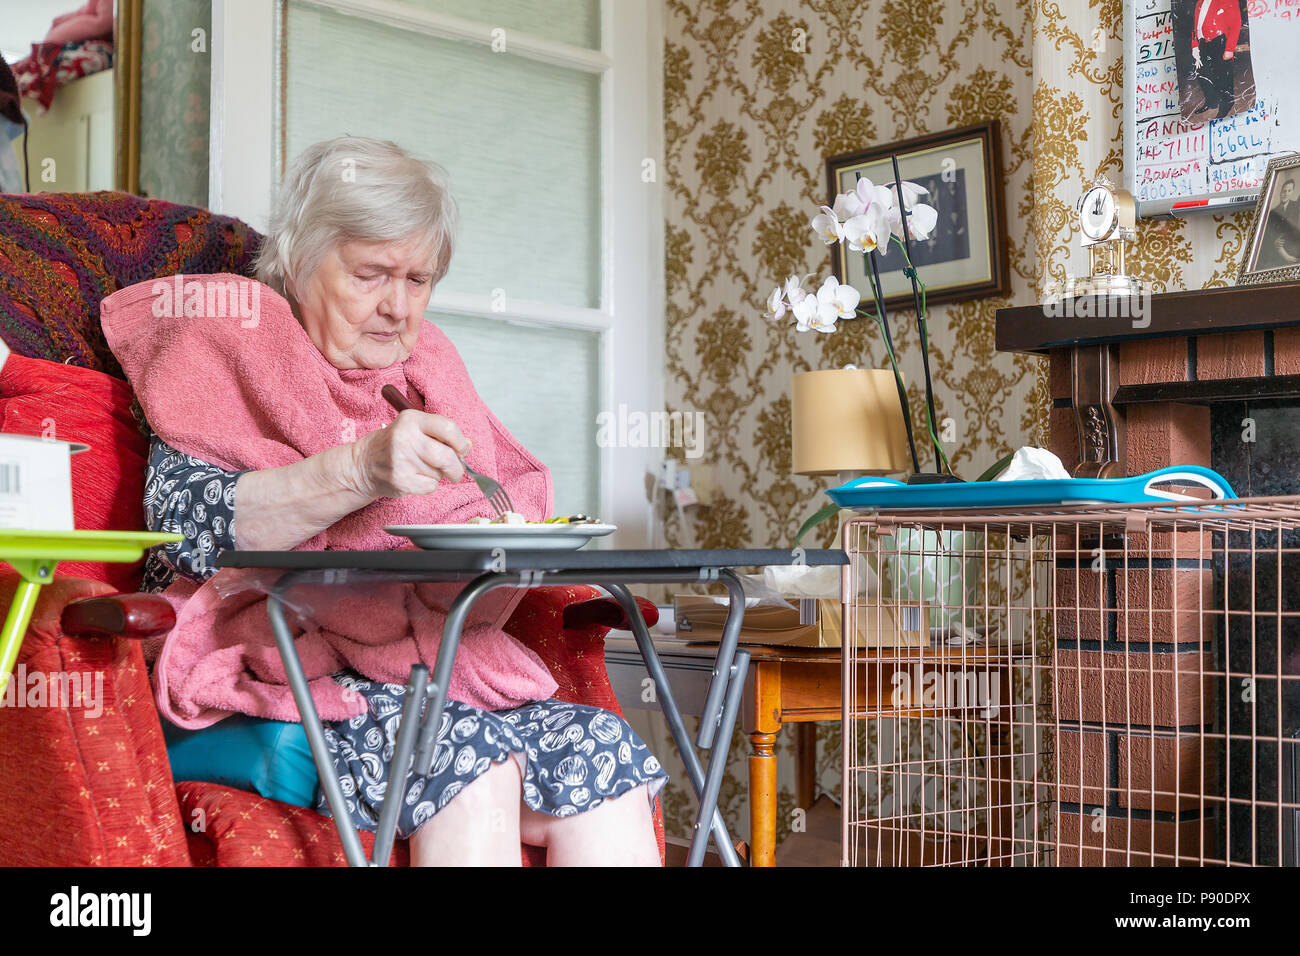 Old lady with dementia sitting in her recliner chair eating her lunch from a table with a towel as a bib Stock Photo